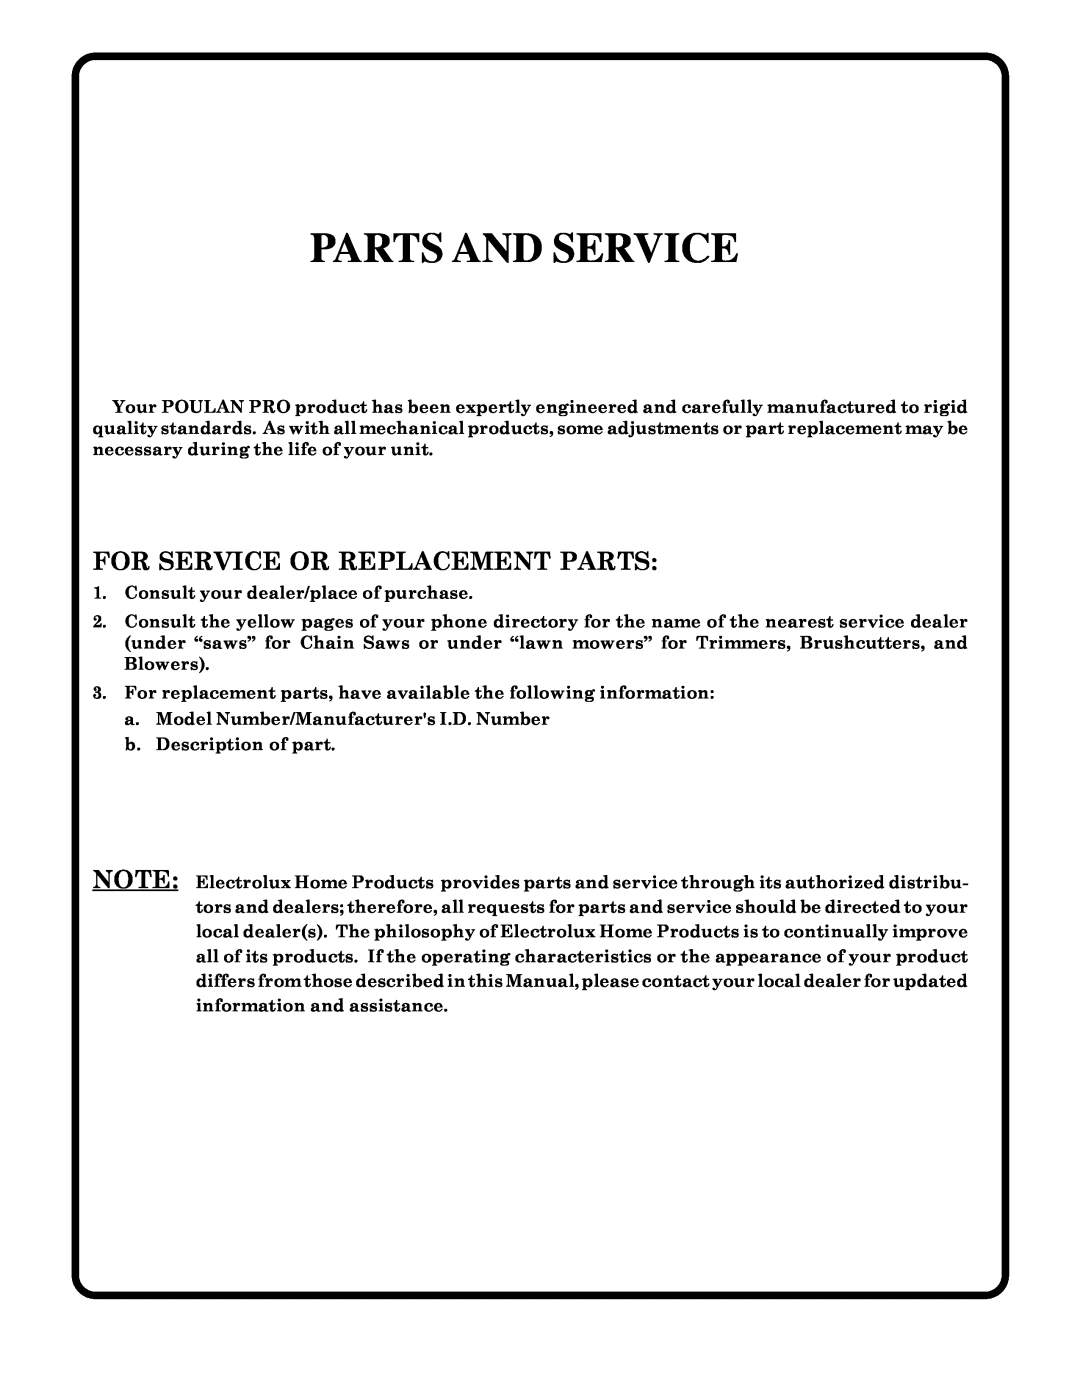 Poulan 177937 owner manual Parts And Service, For Service Or Replacement Parts 